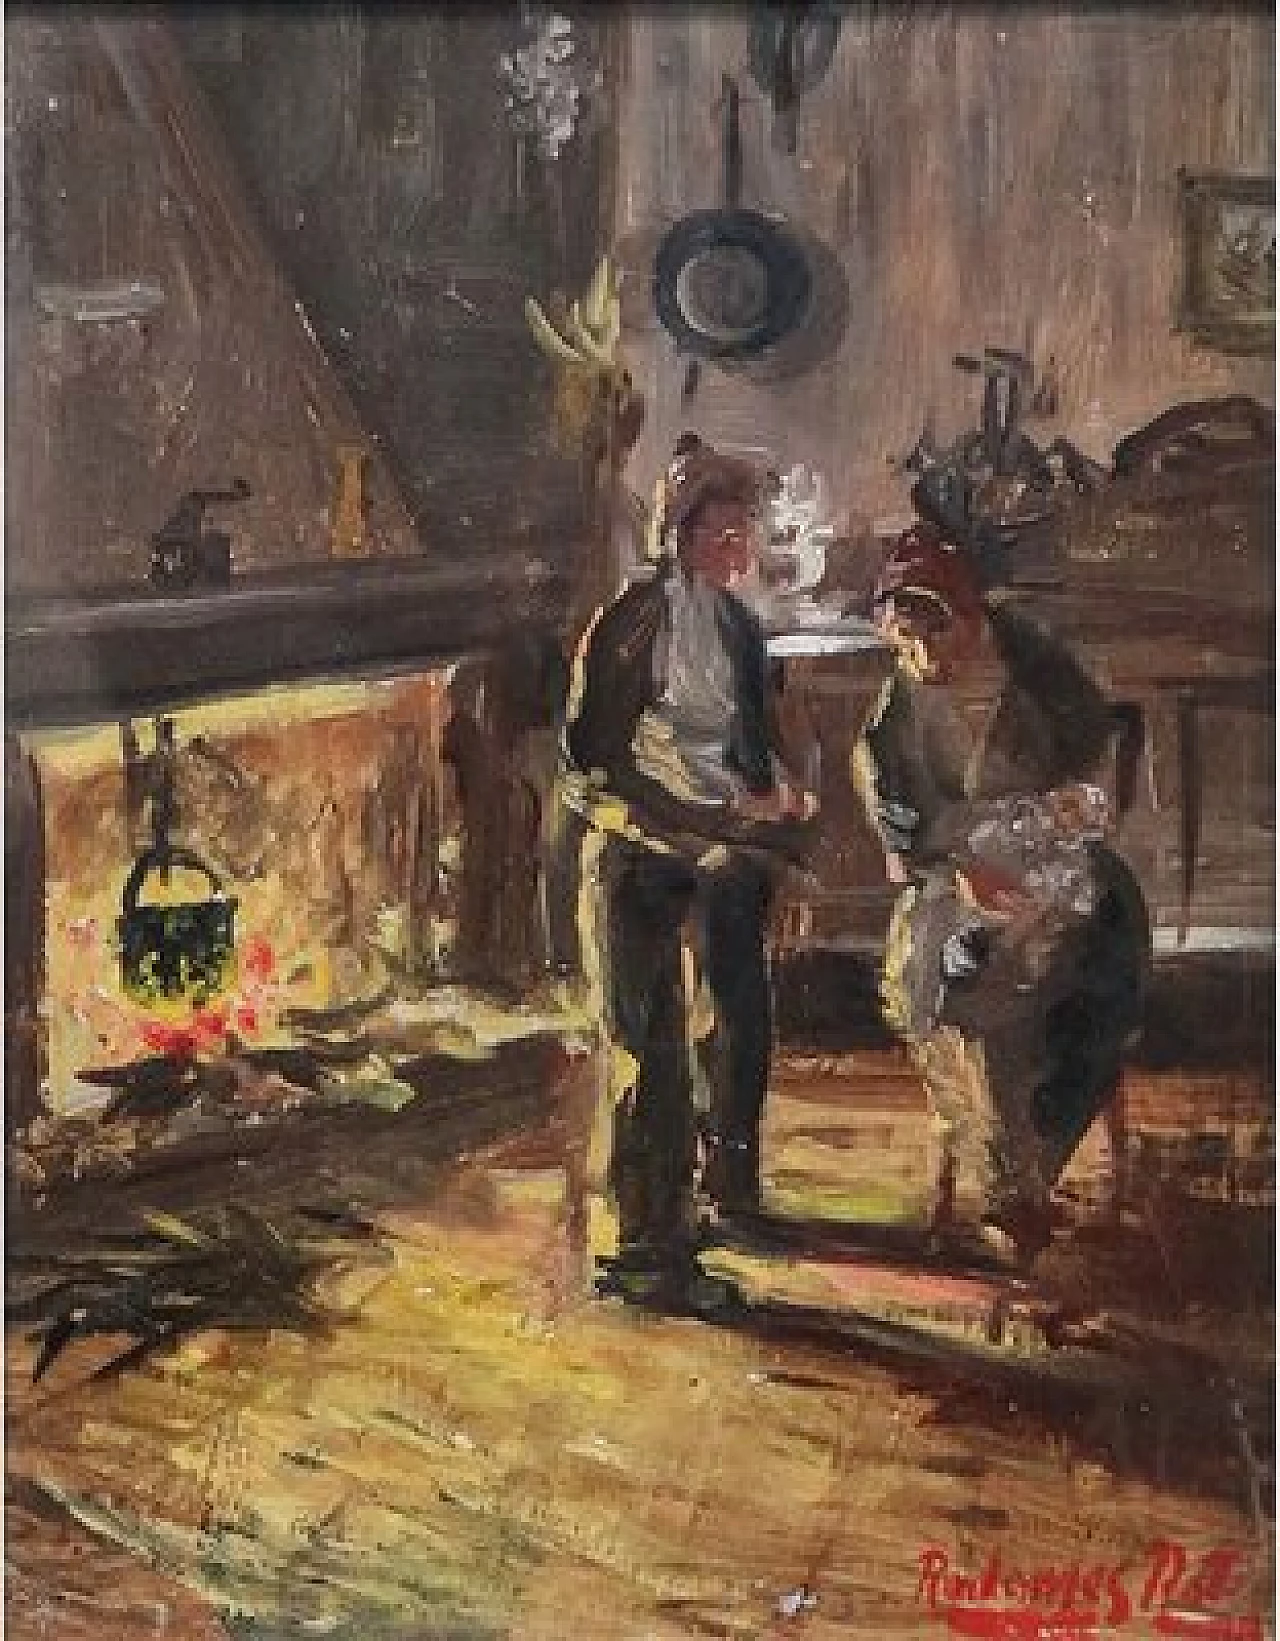 Radames Rota, Kitchen interior with fireplace and characters, oil on panel, 1920s 1